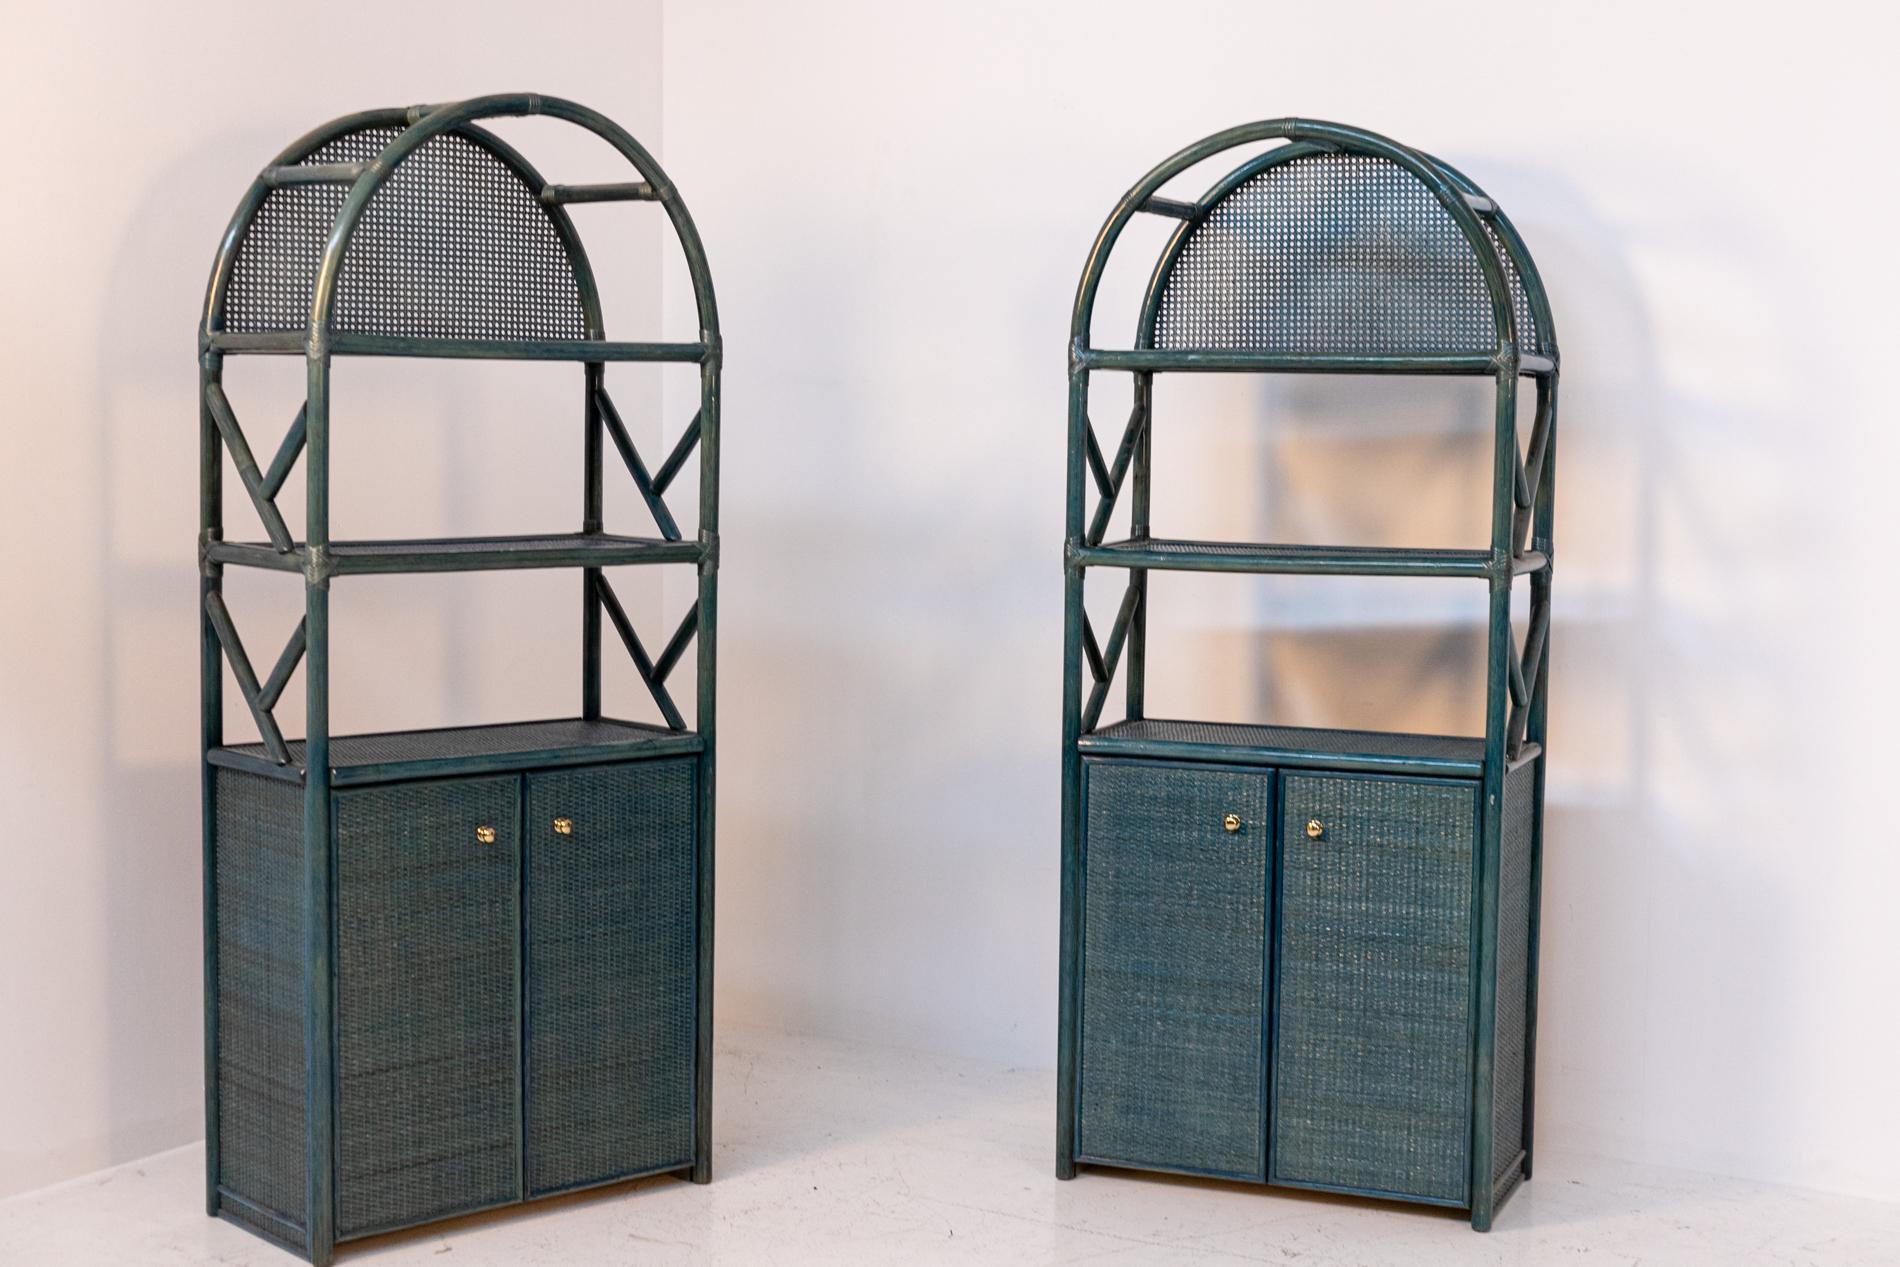 Elegant 80's Italian post modern bamboo bookcase.
The bookcase is excellently made with a bamboo structure painted or lacquered in teal or blue. In the lower part we find two door doors made of rattan (in the outer part, inner wood) green openable